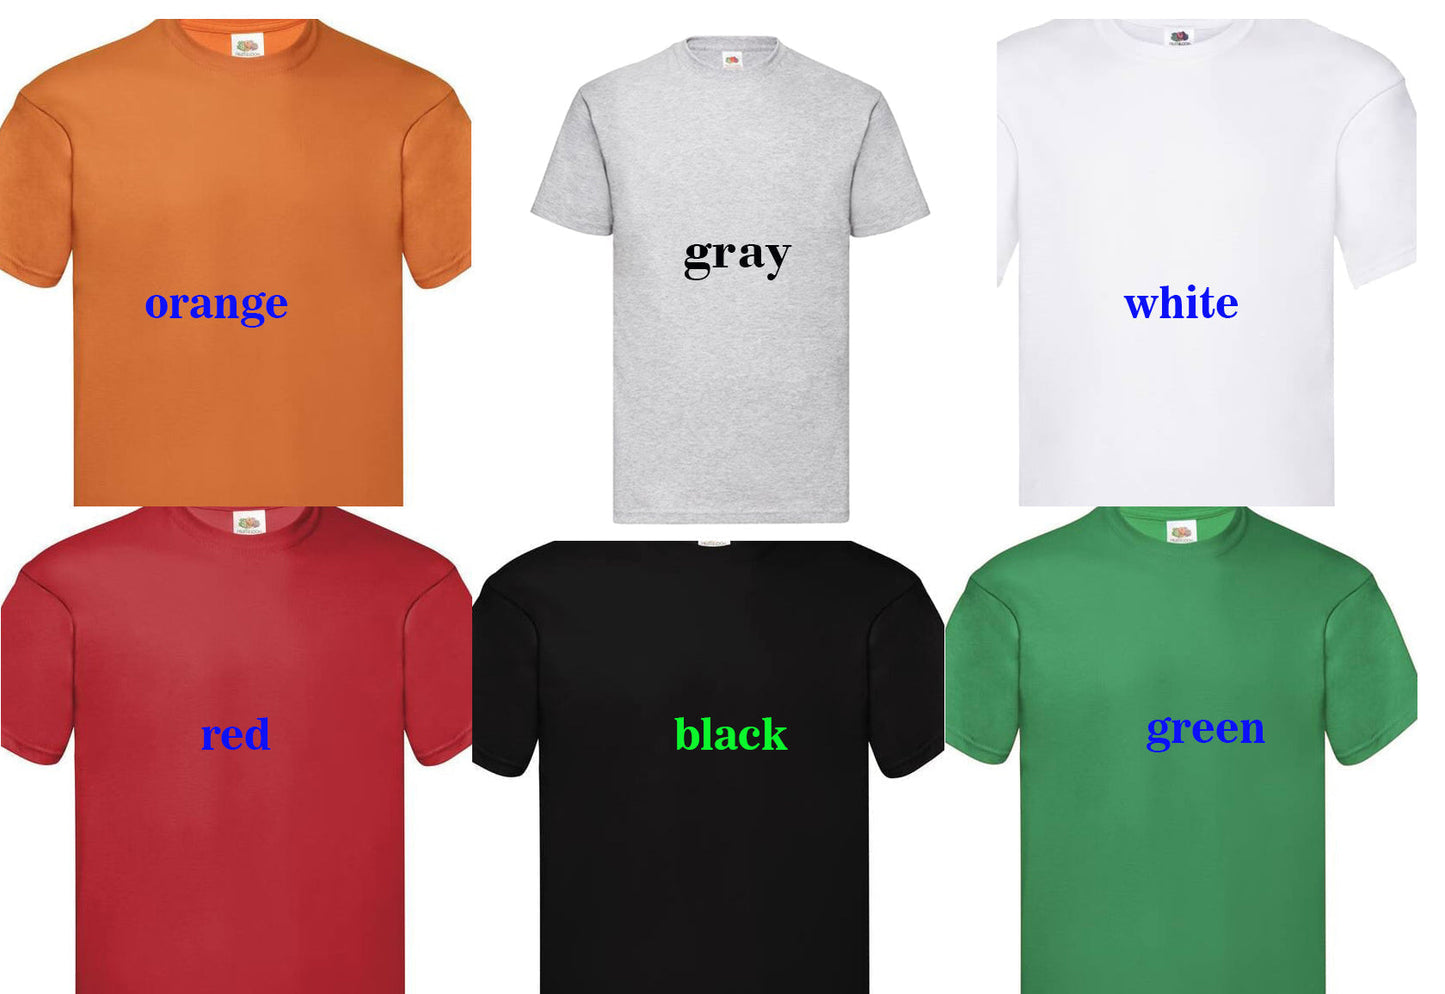 074. CRAZY FACE, Personalized T-Shirt, Custom Text, Make Your Own Shirt, Custom Tee